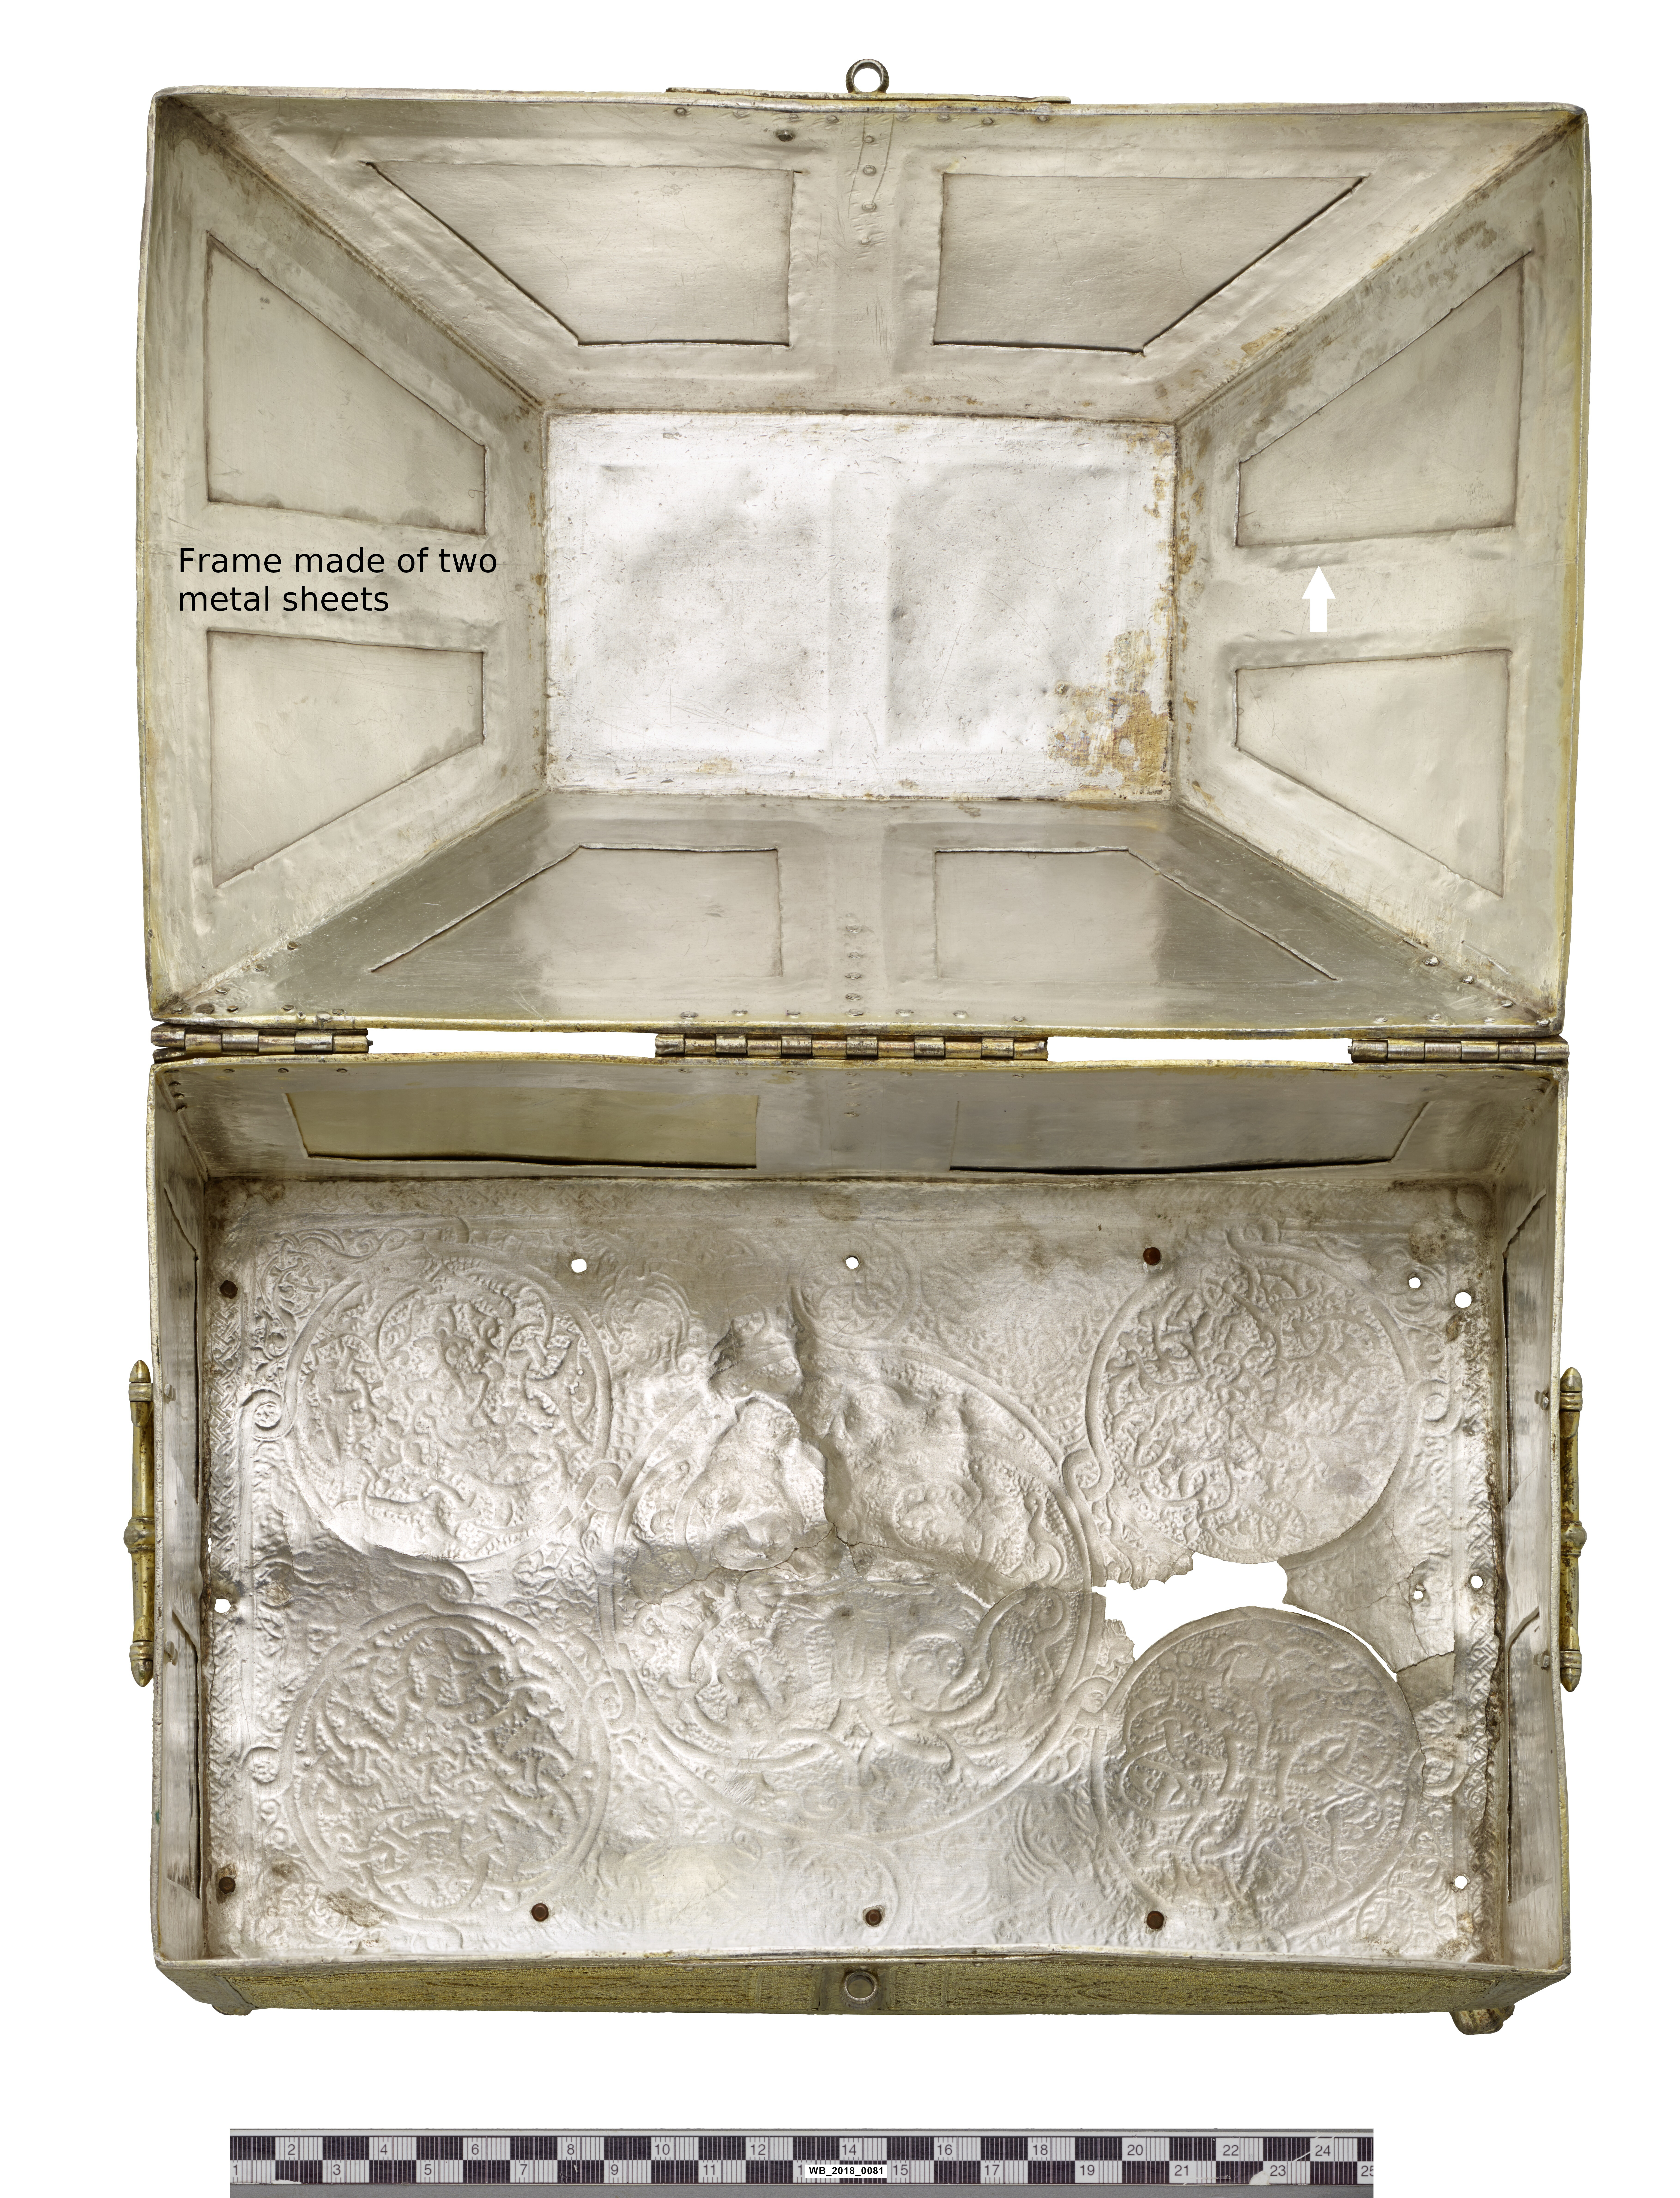 Trier casket, interior. White arrow indicates where the outer, narrower frame has pushed through the inner layer.